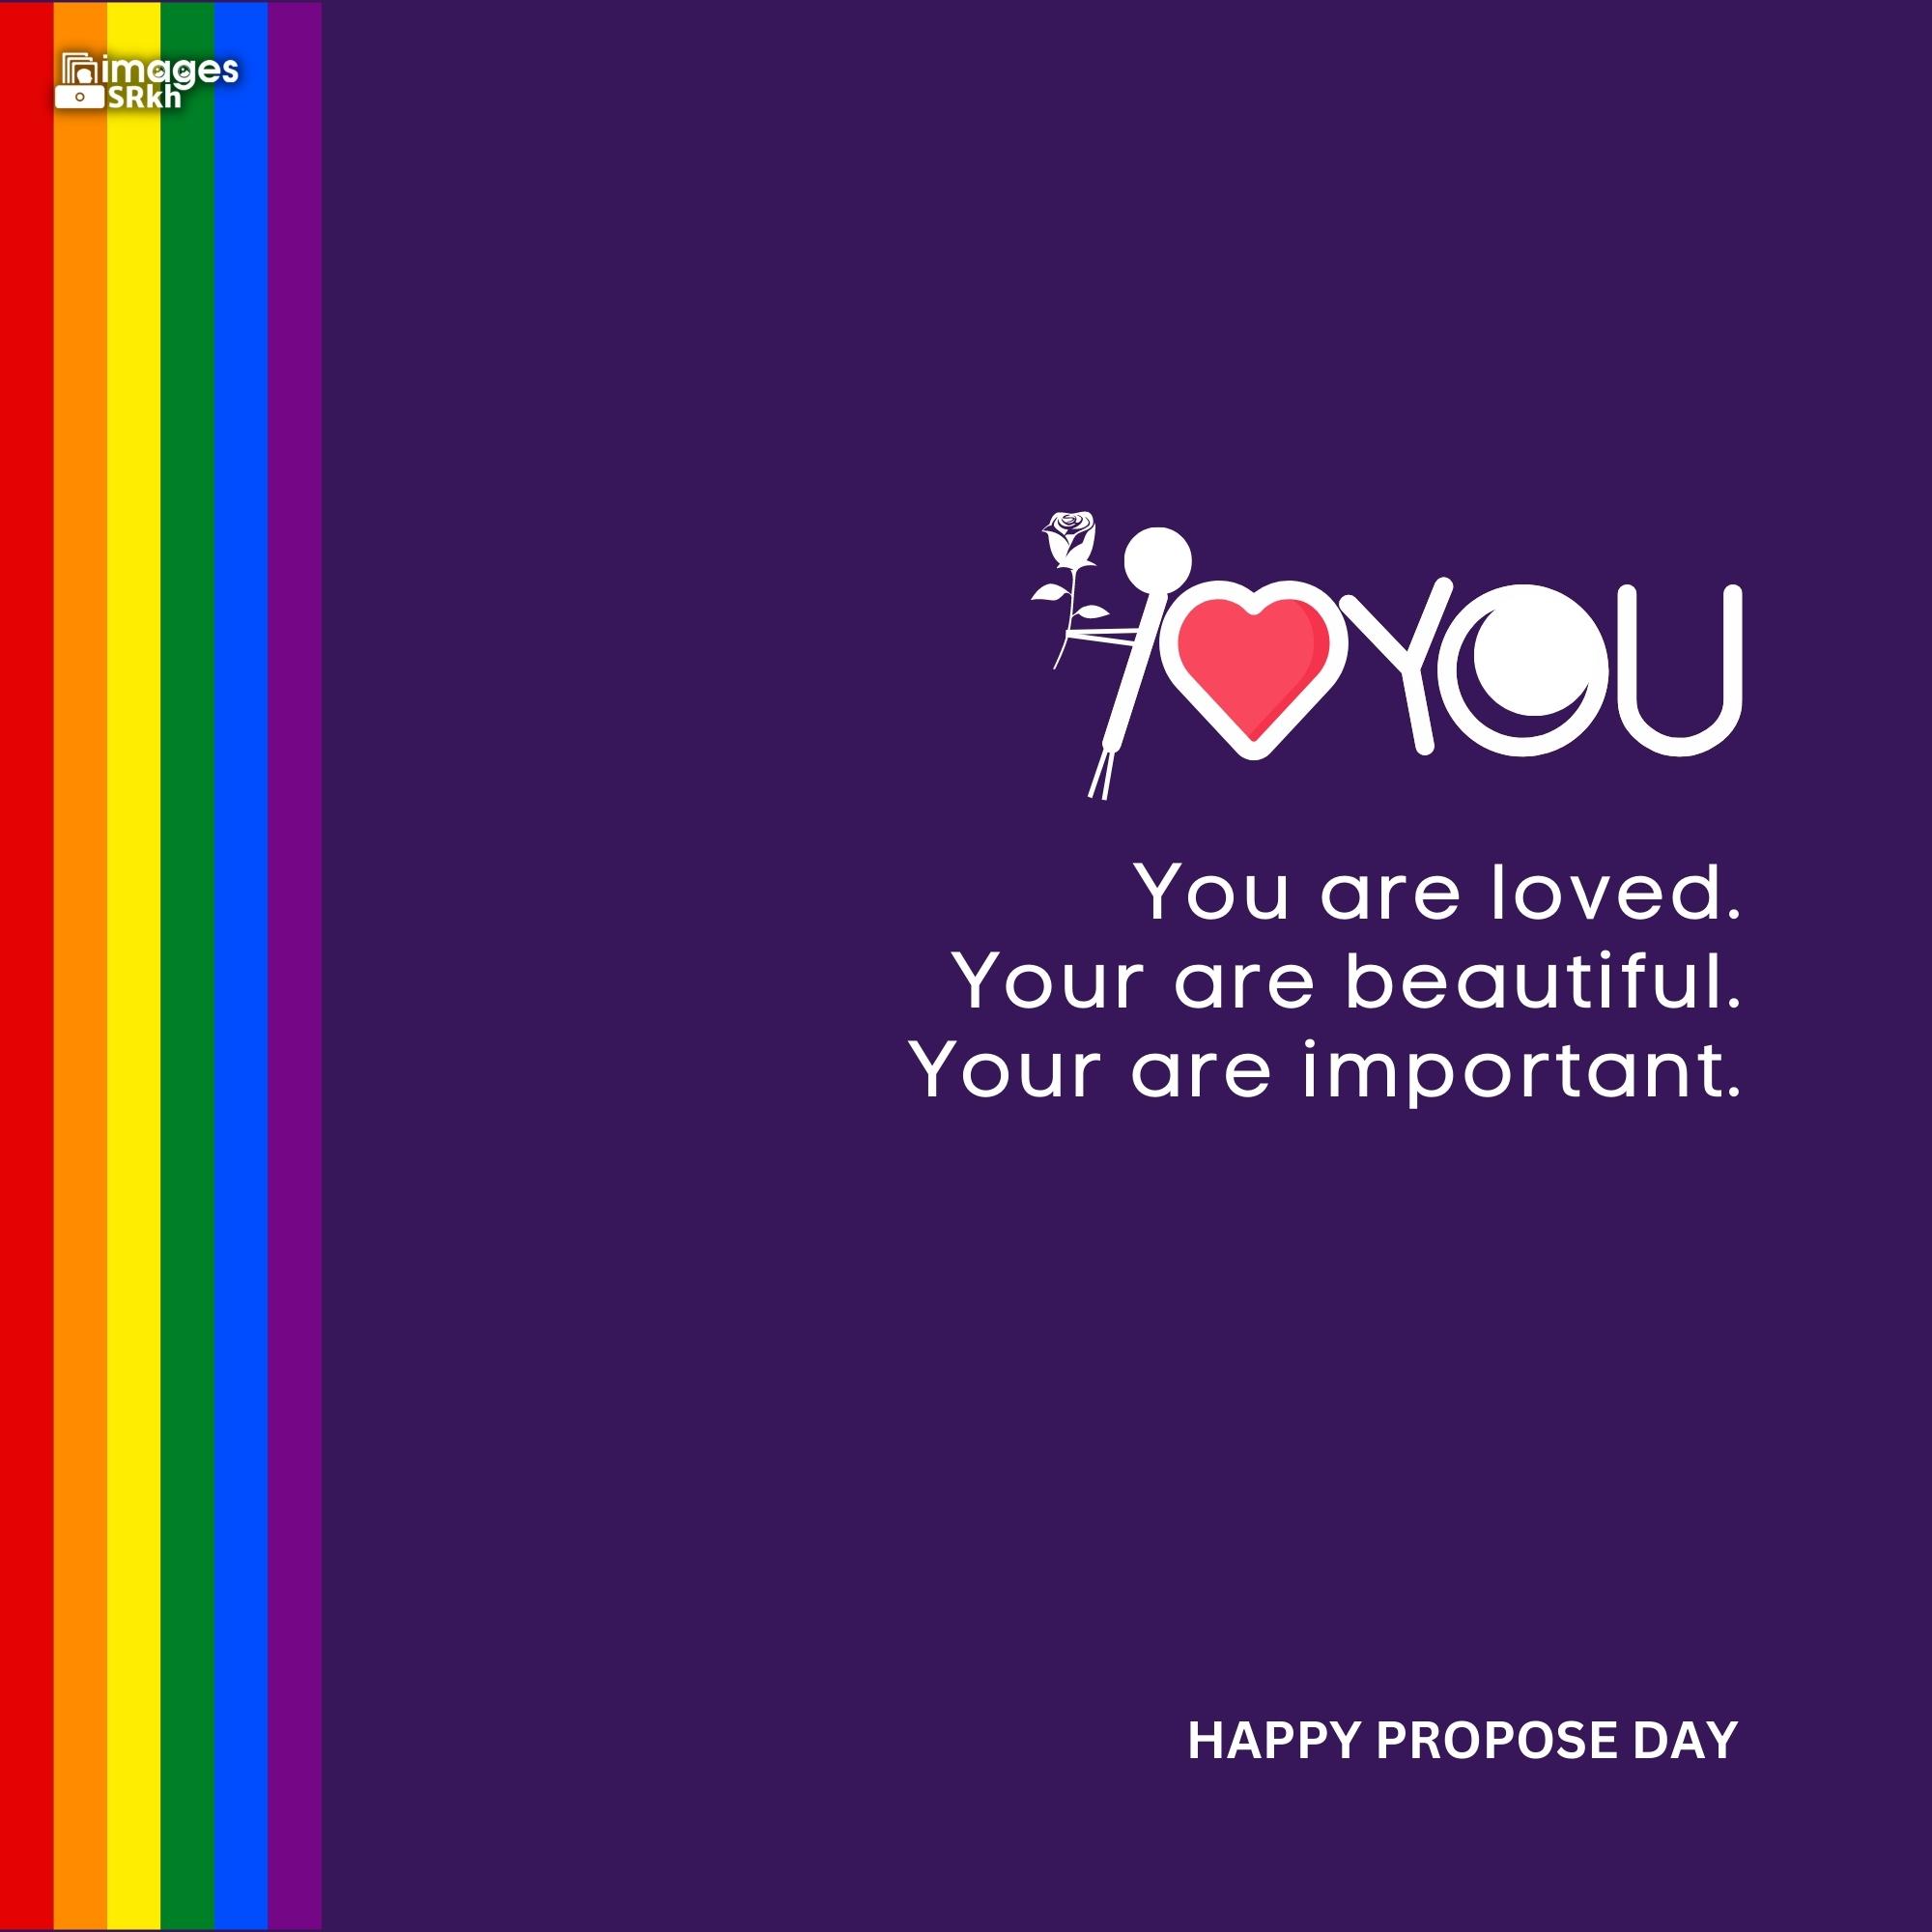 Happy Propose Day Images | 391 | I LOVE YOU